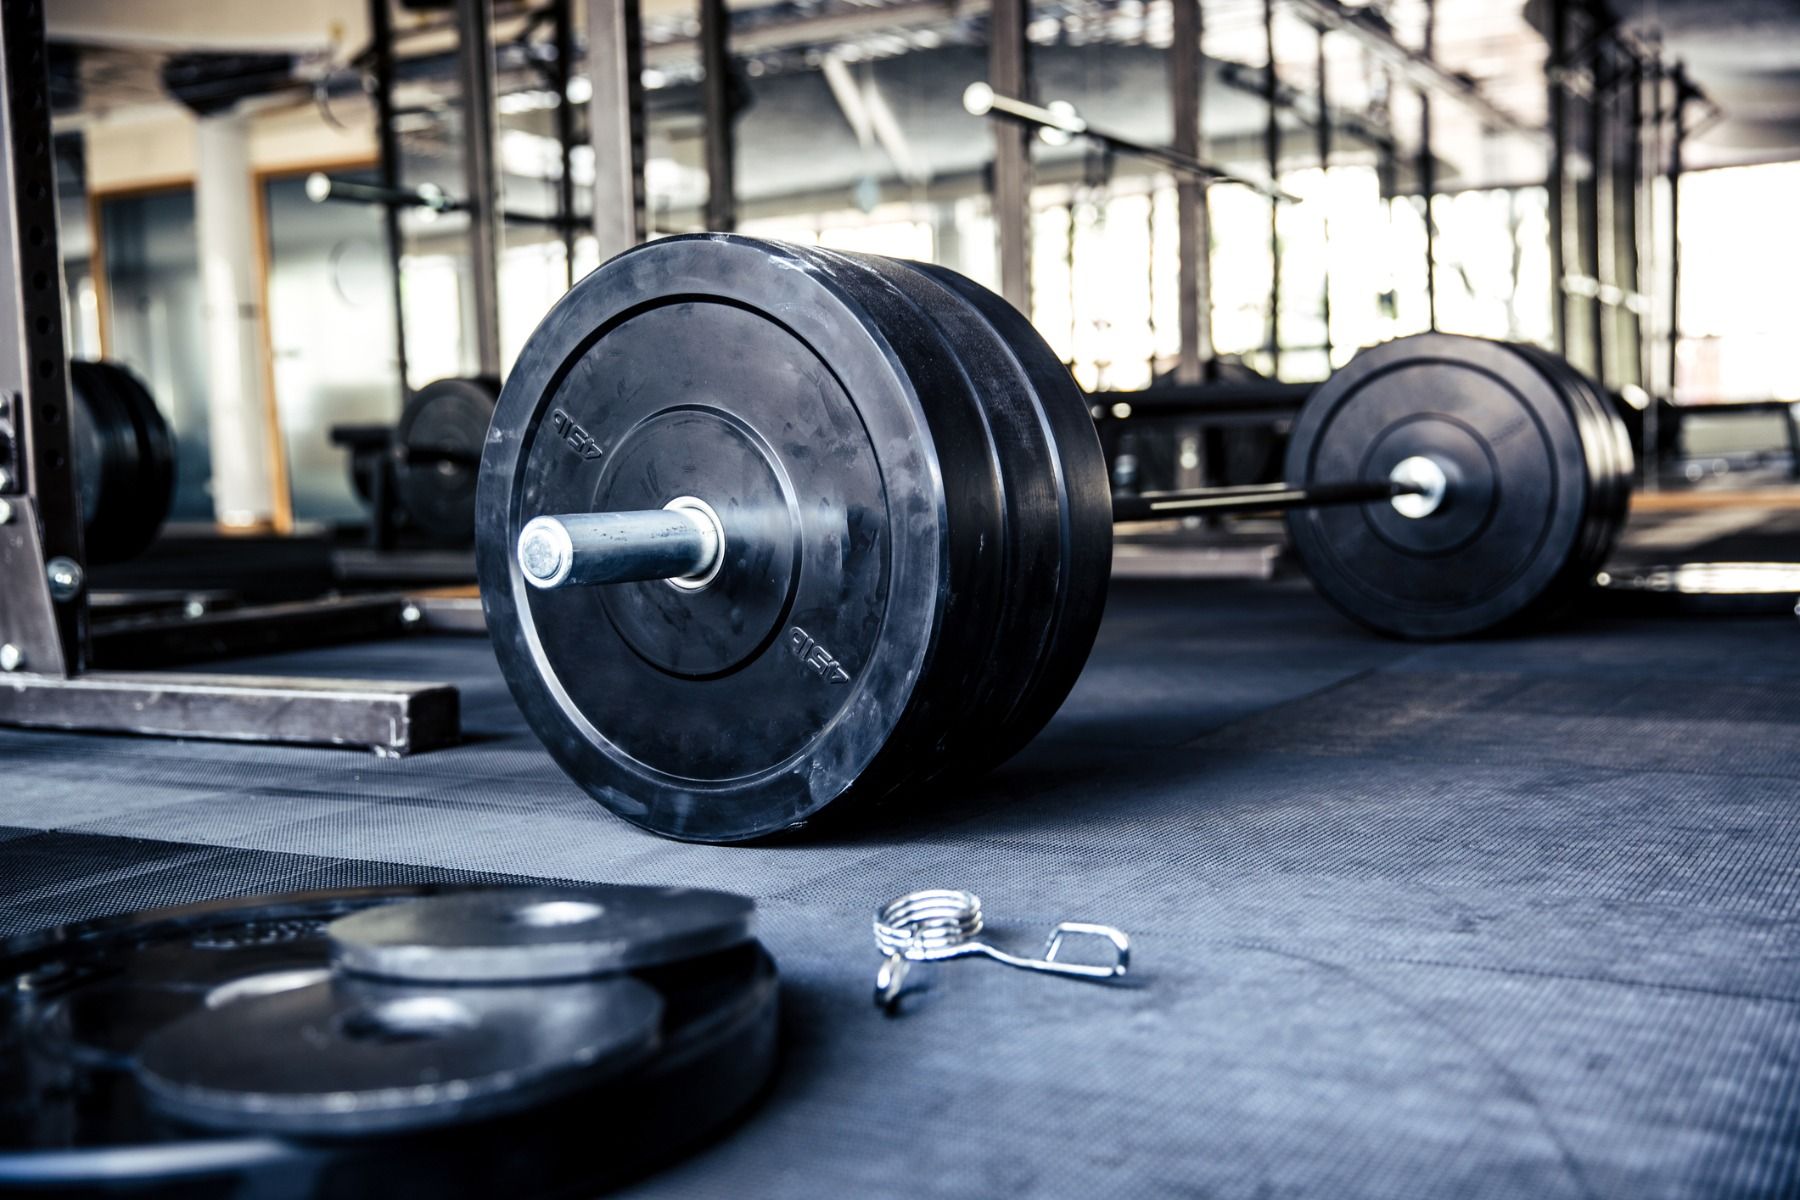 11 gym etiquette rules - Have respect to the weights